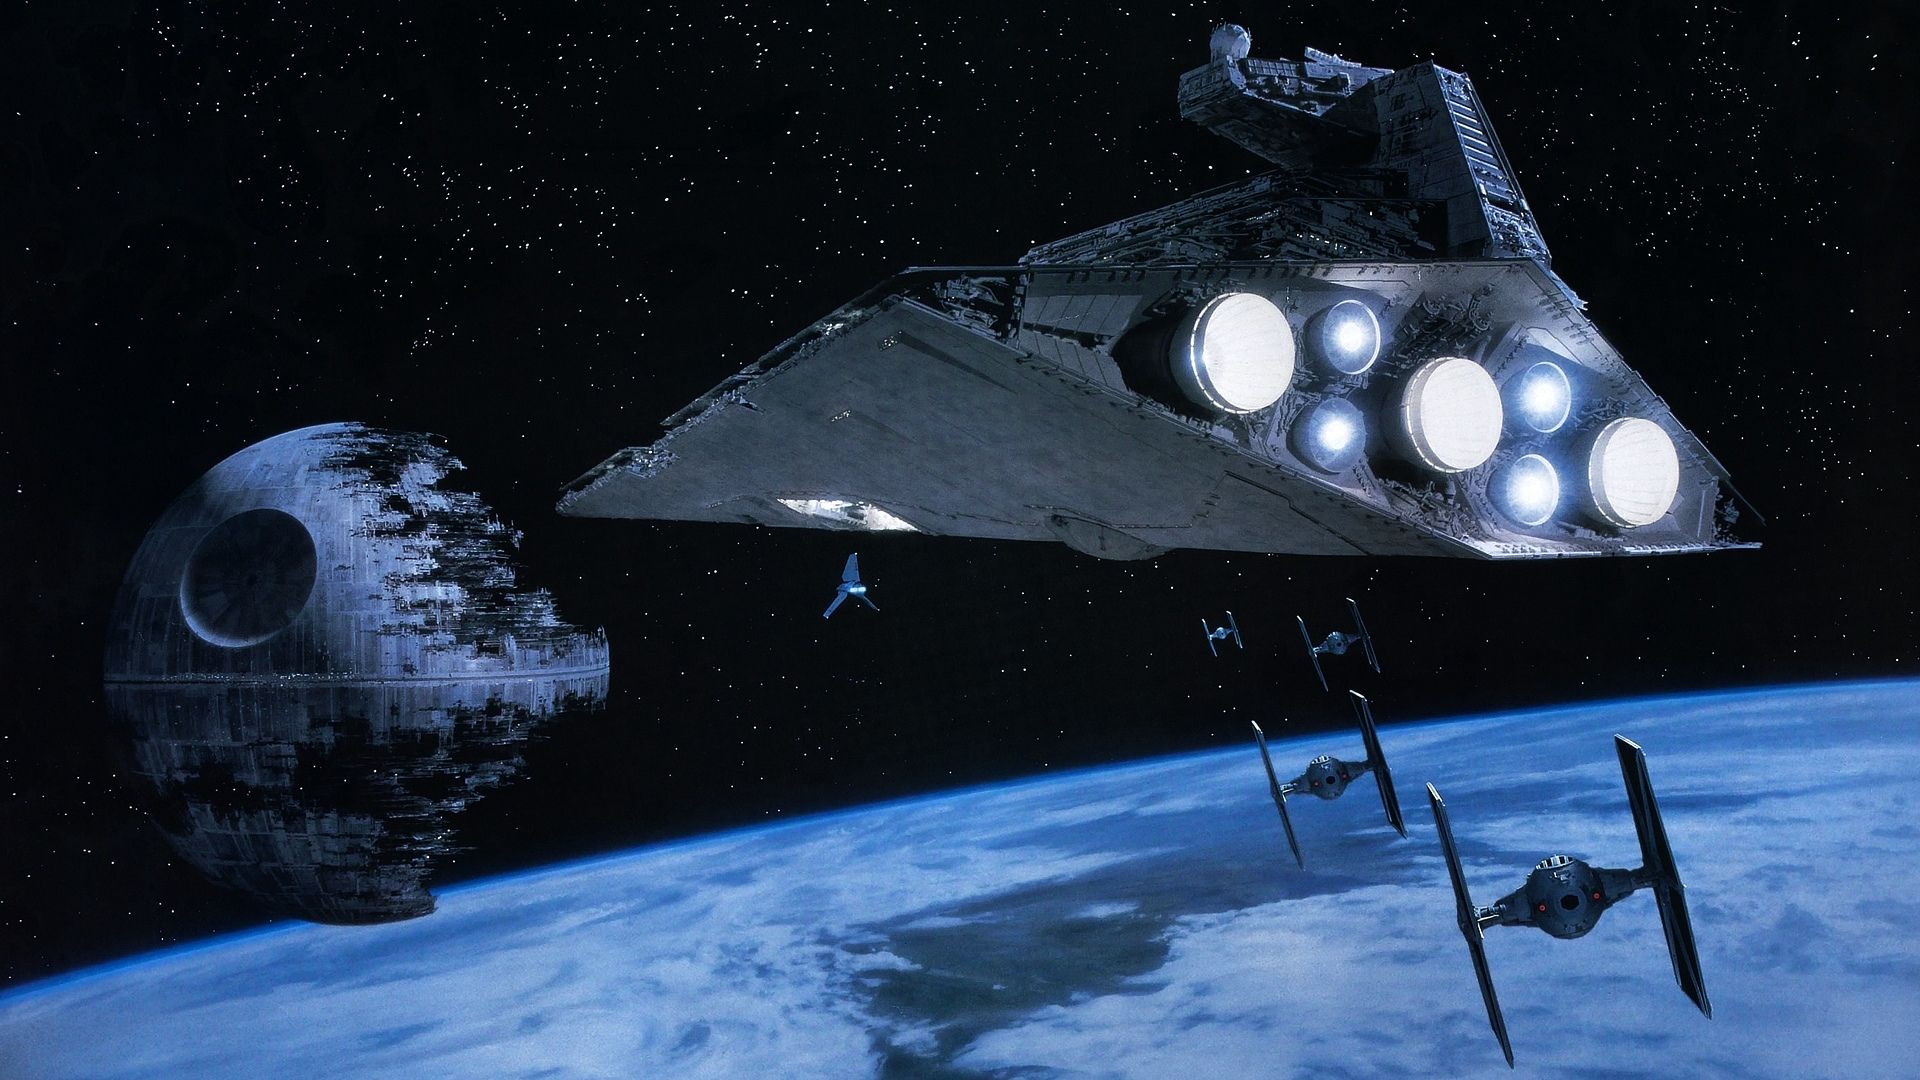 Star Wars: The Force Awakens' Starkiller Base is More Powerful Than the Death Star